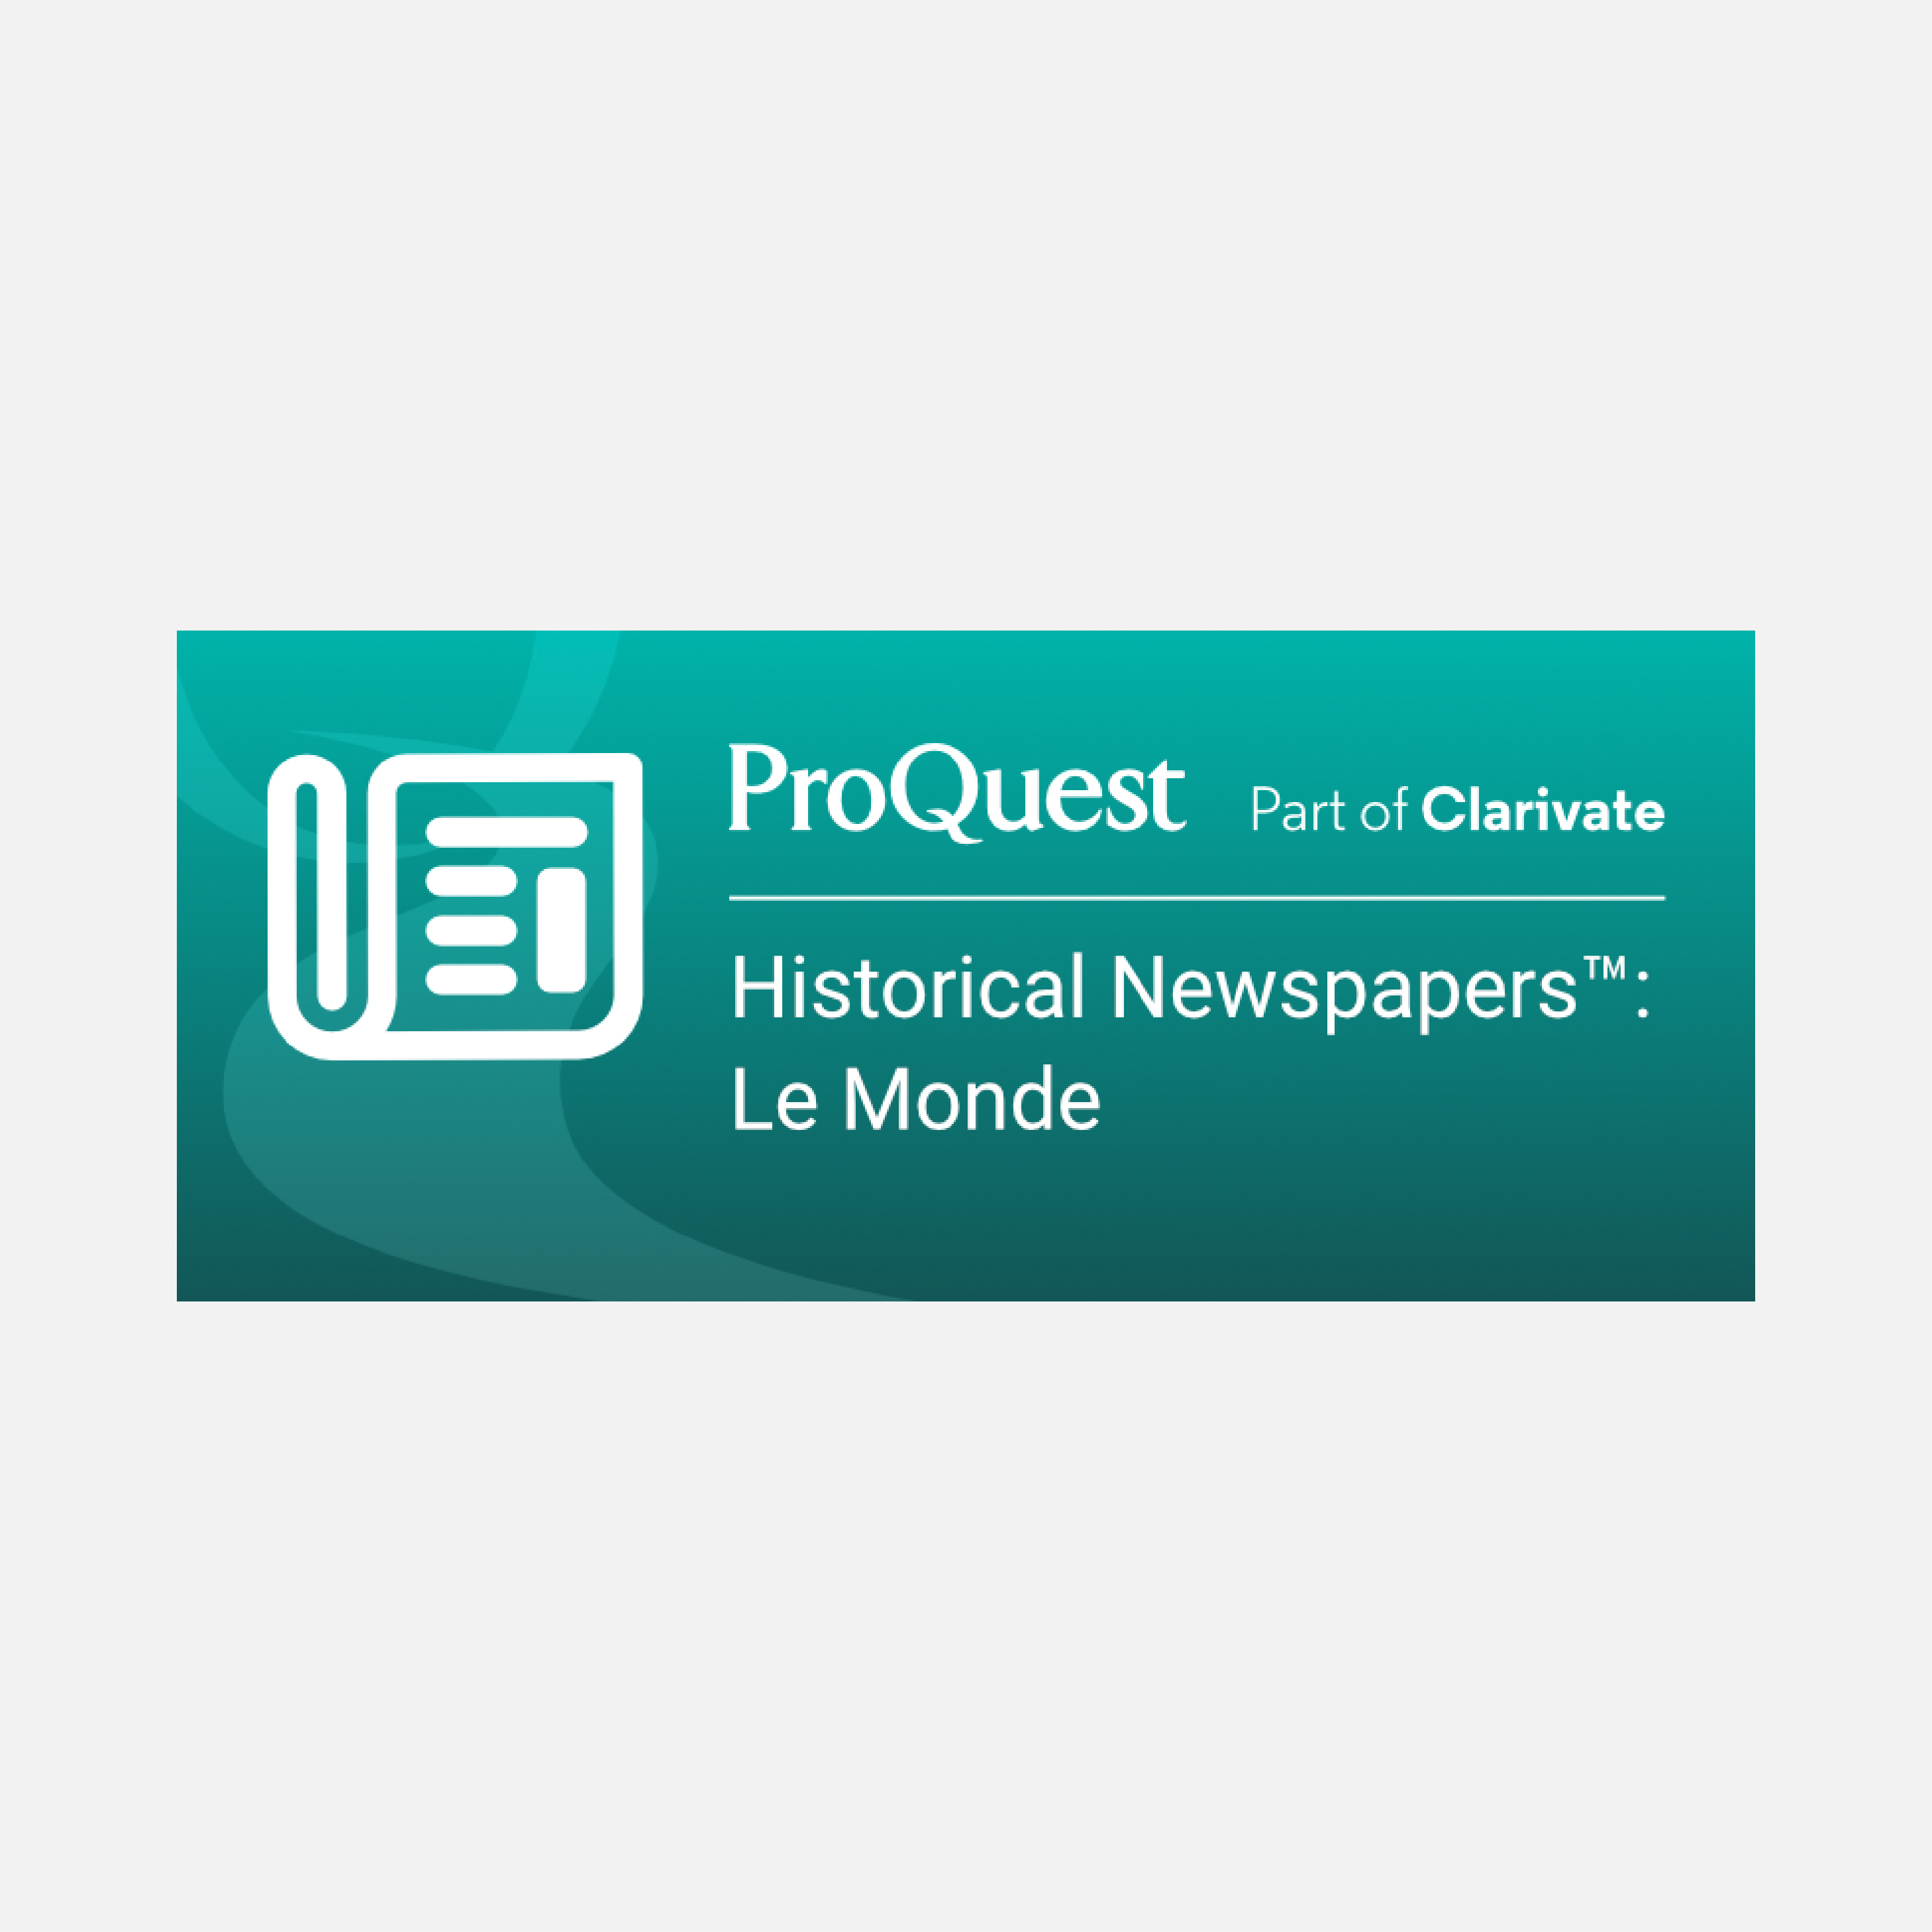 logo Le Monde (ProQuest Historical Newspapers)